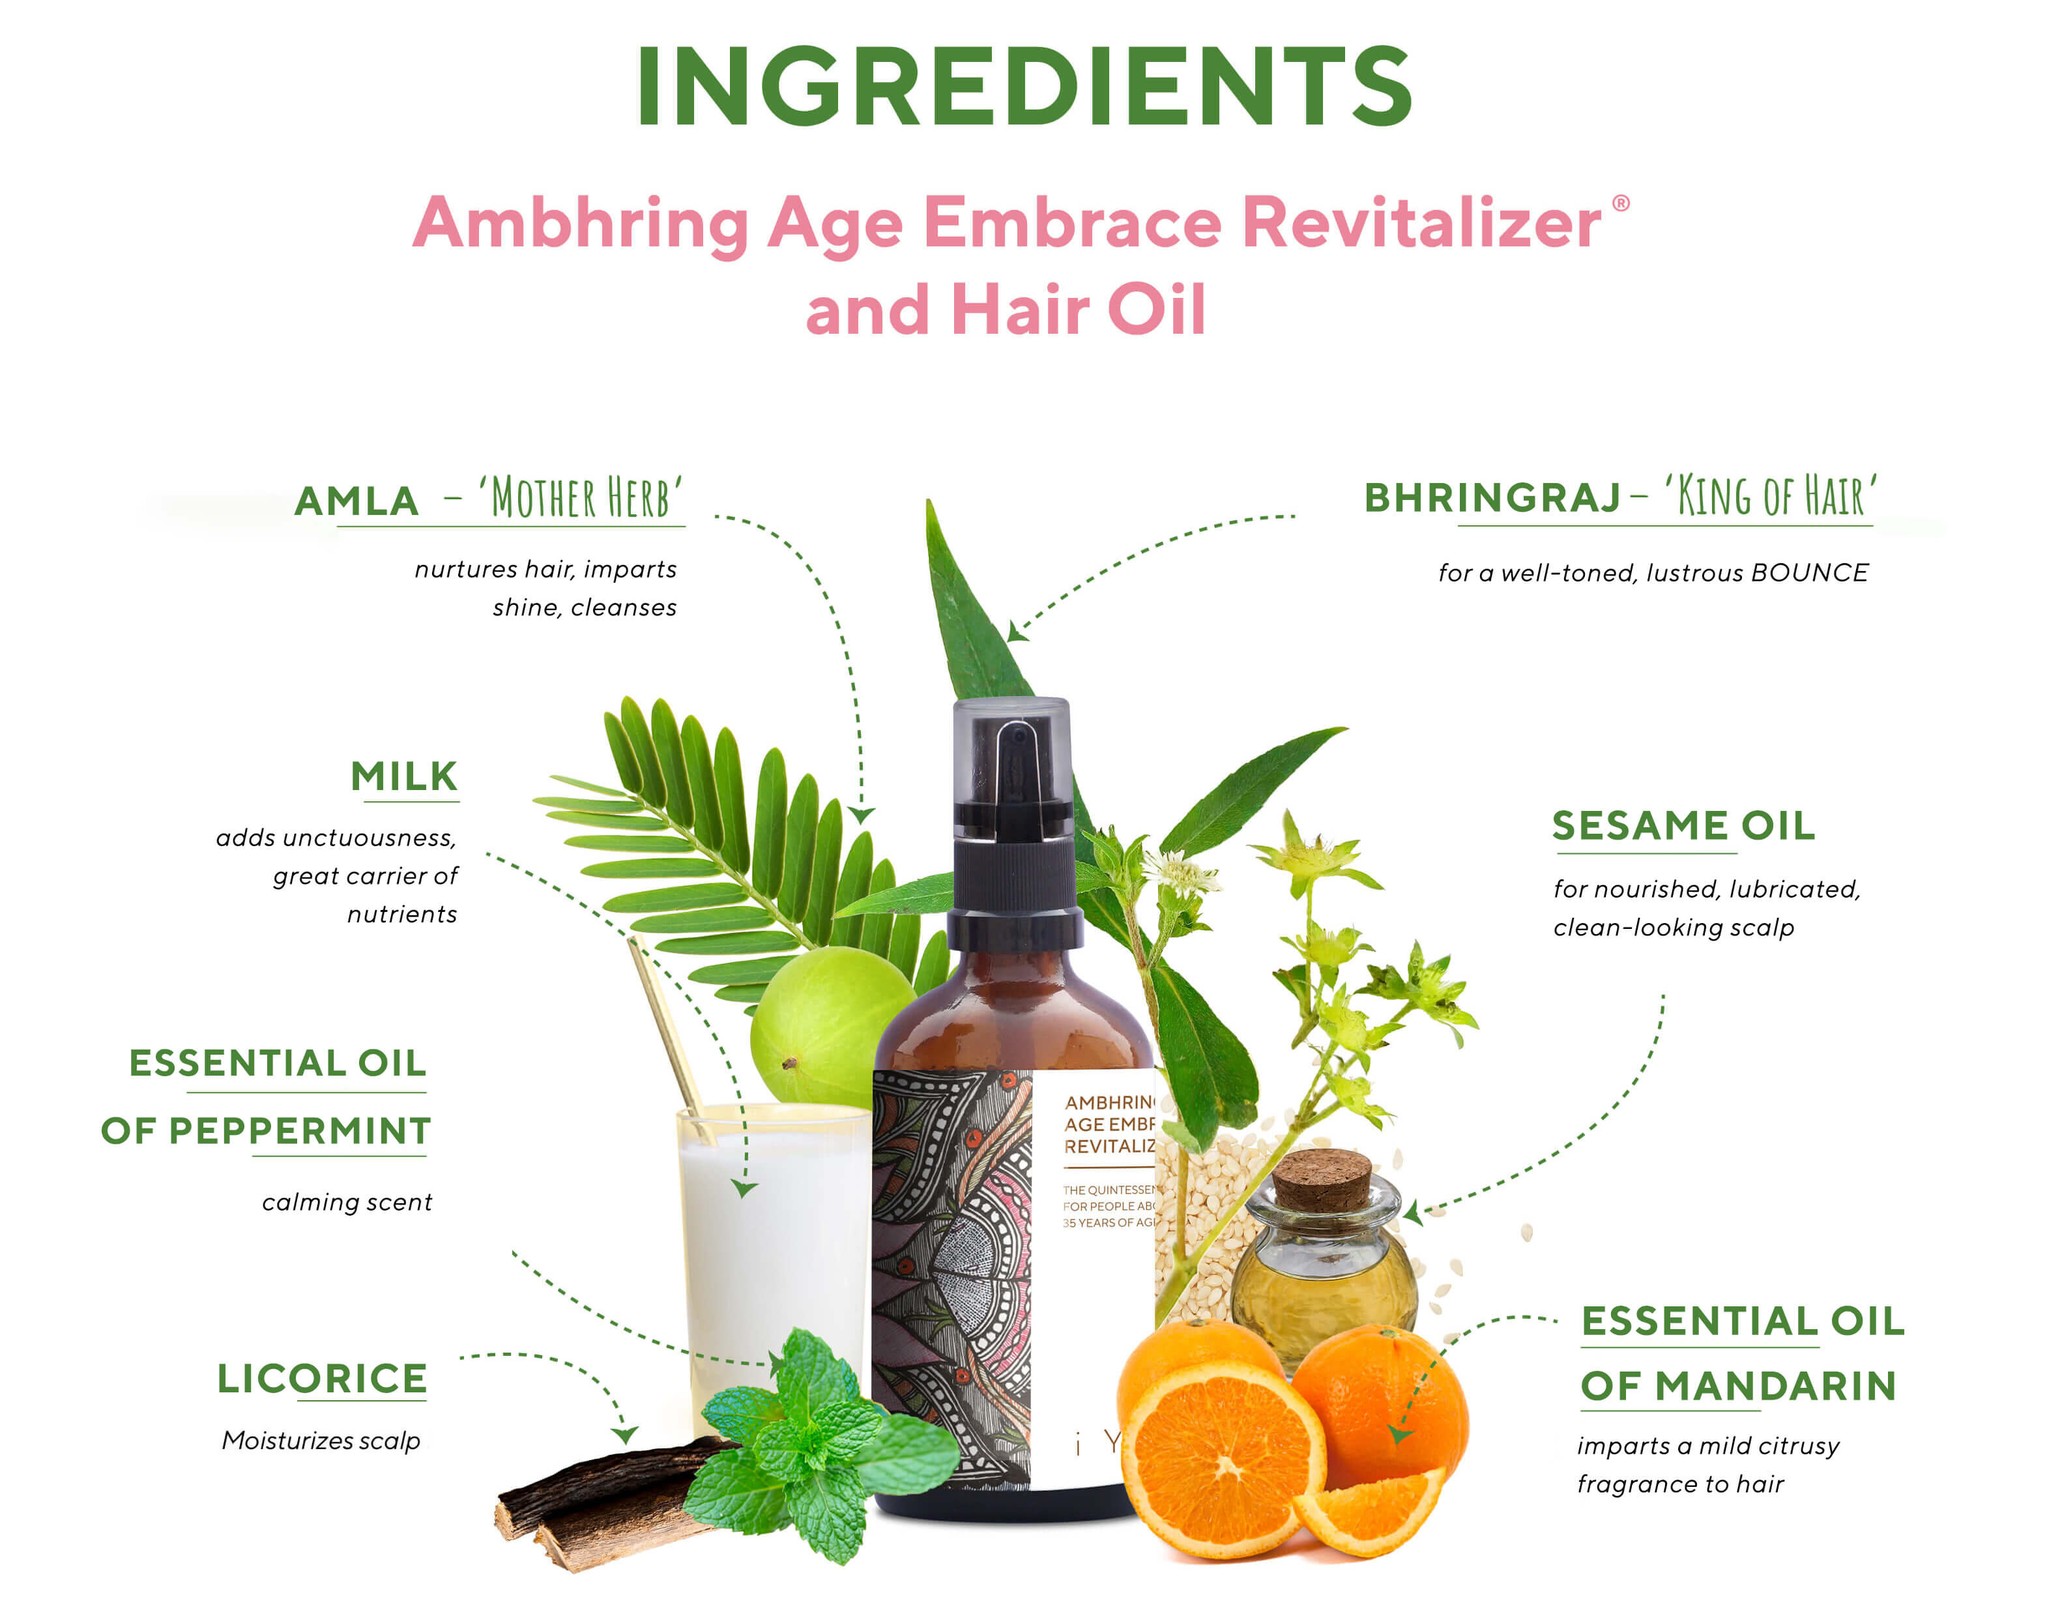 iYURA Ambhring Age Embrace Hair Revitalizer and Hair Oil : Ingredients & Benefits